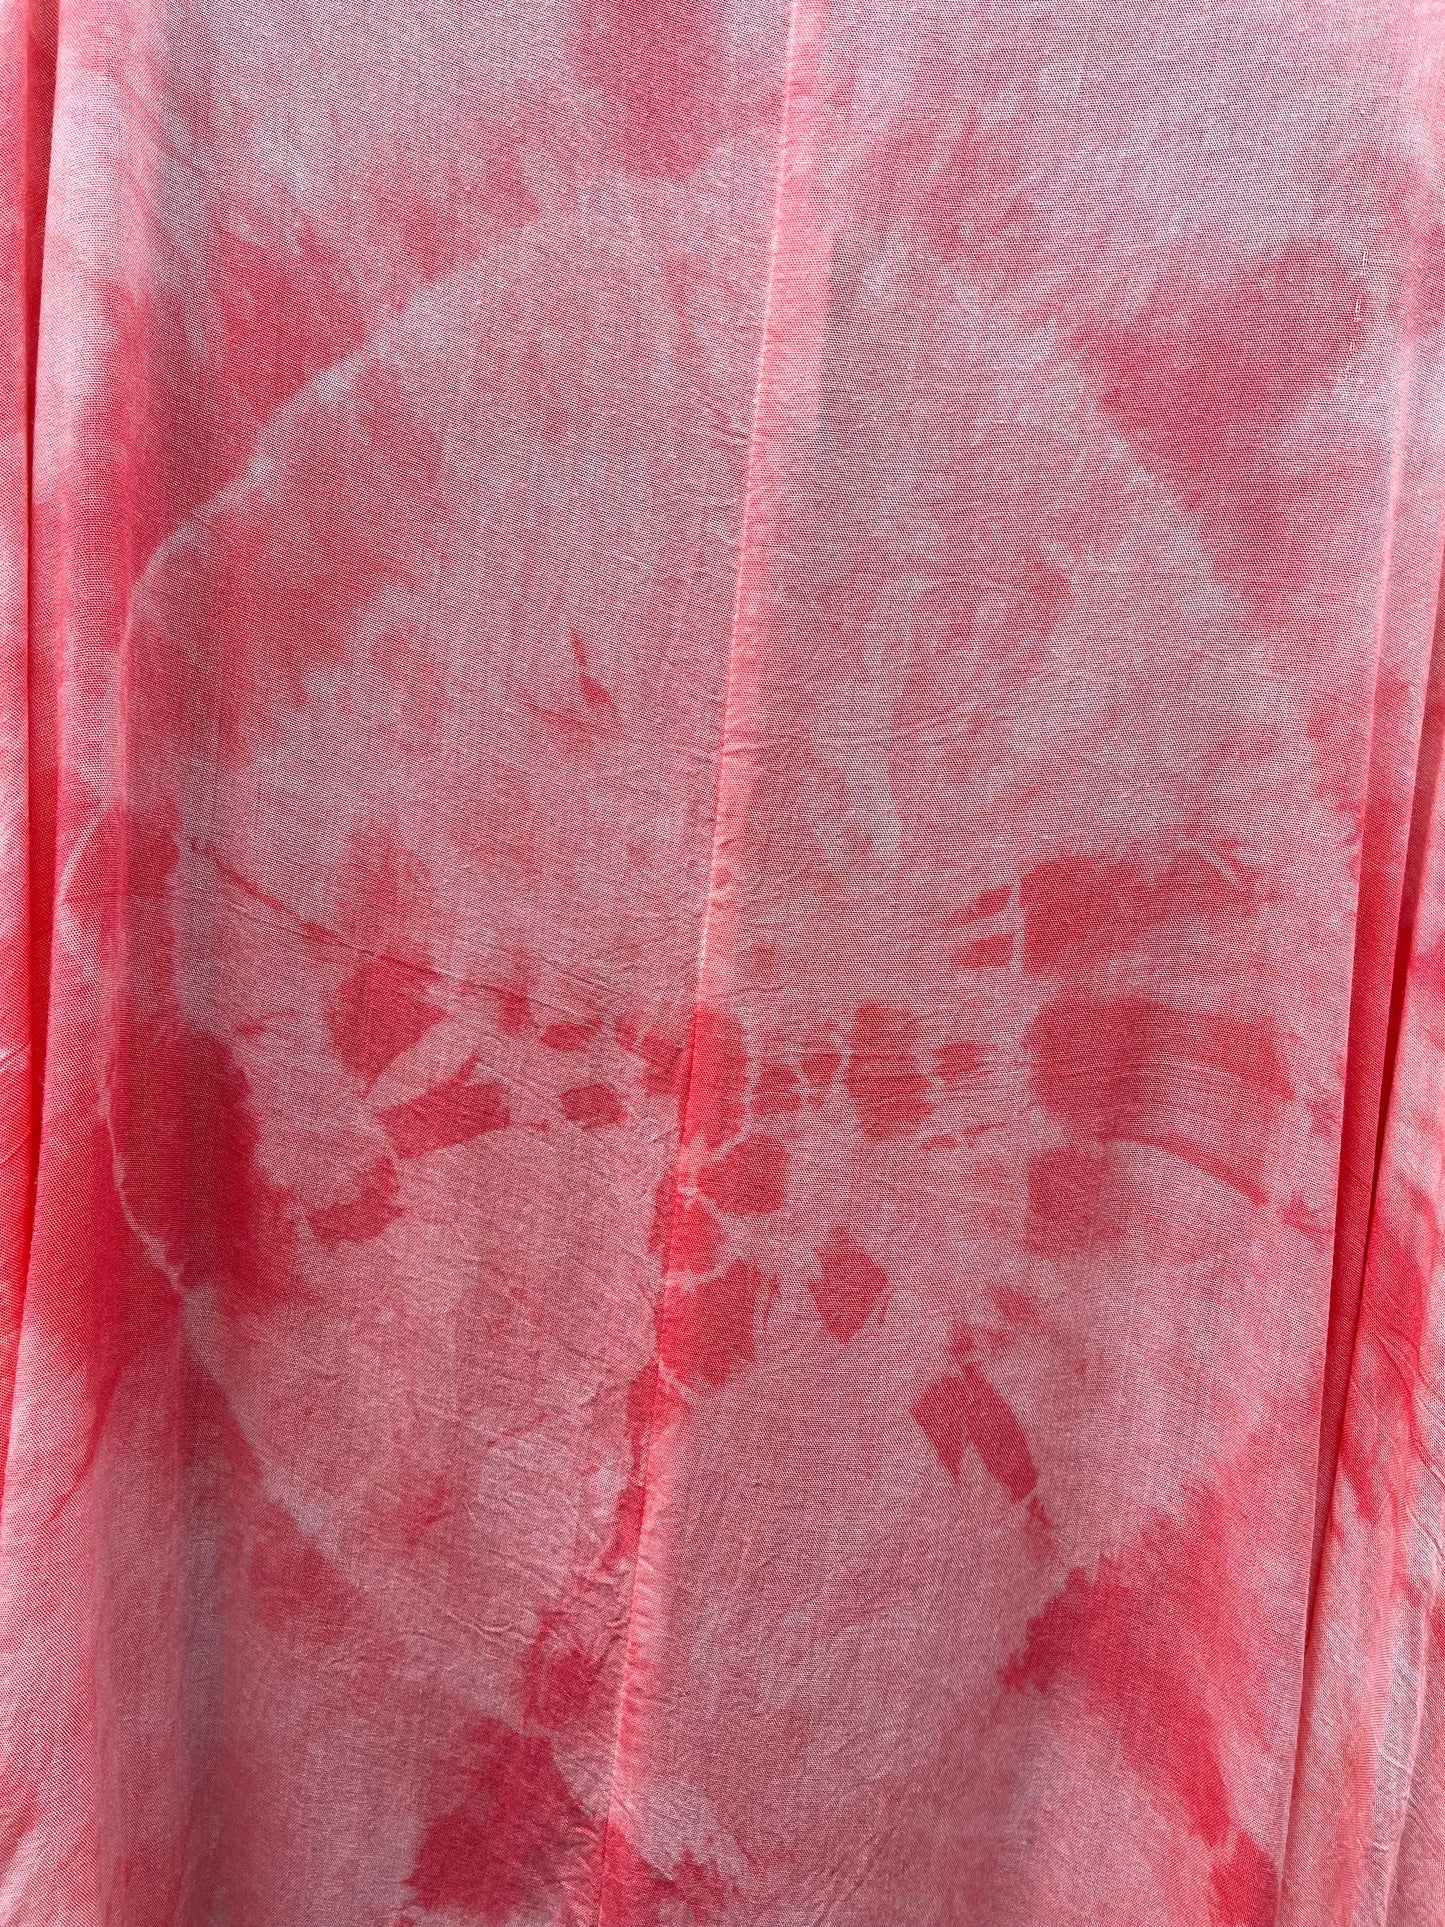 Coral Tie Dye Scarf and Wrap - The Butterfly Wrap Number 6 - Tie Dye Sustainable Rayon Wrap by 1 Life